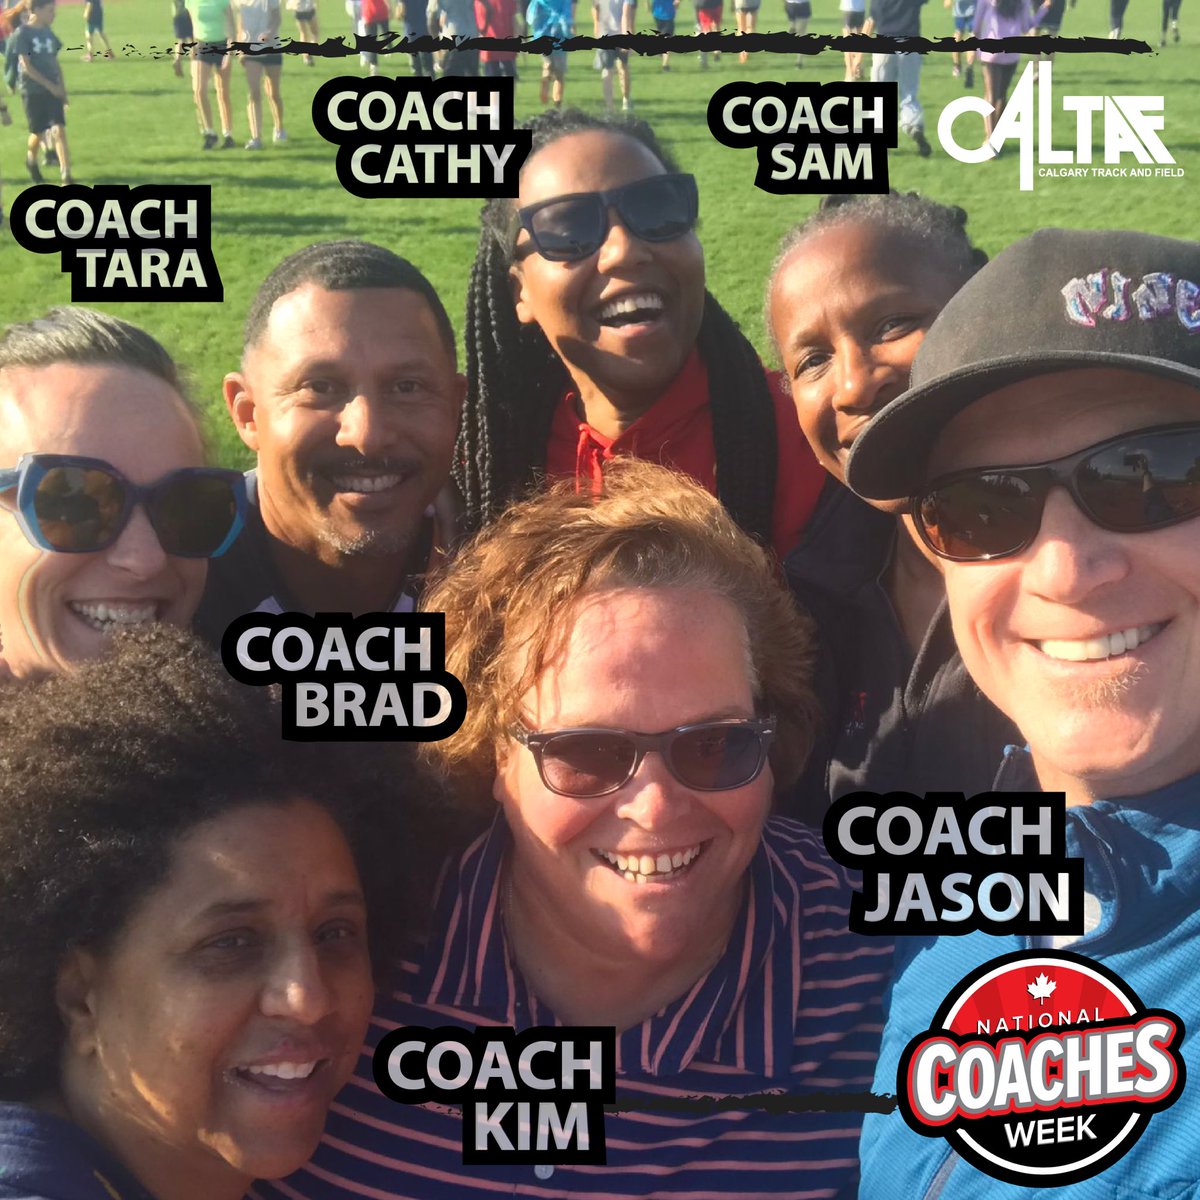 Our coaches are a team. We support each other and have fun together! Team work makes the dream work!
#nationalcoachesweek #thankscoach 
@AthleticsCanada @athleticsab